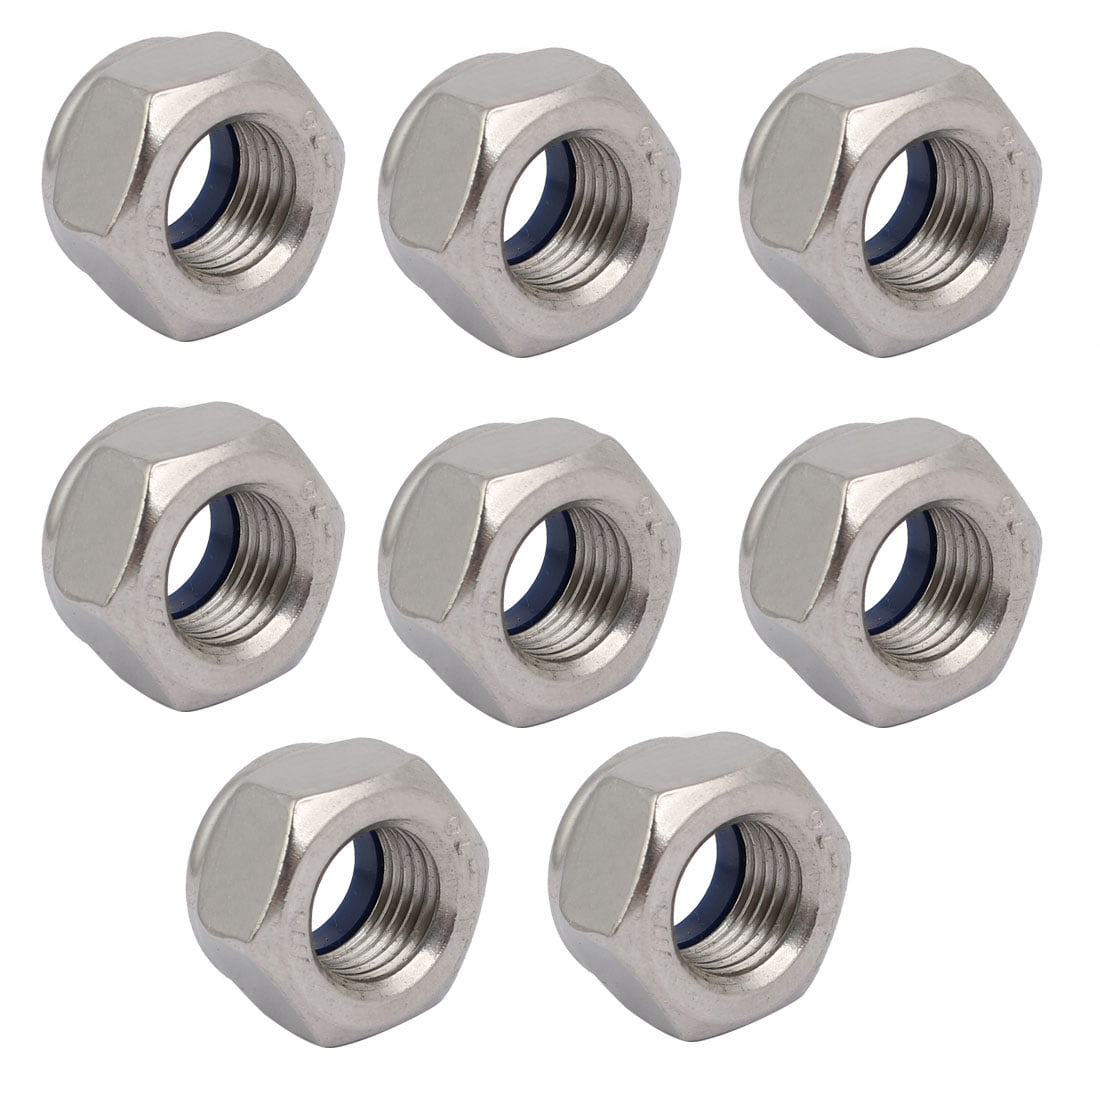 100 M8-1.25 Metric Coarse Thread Lock Nut 8mm Nuts With 13 Hex nylock nuts 8mm 